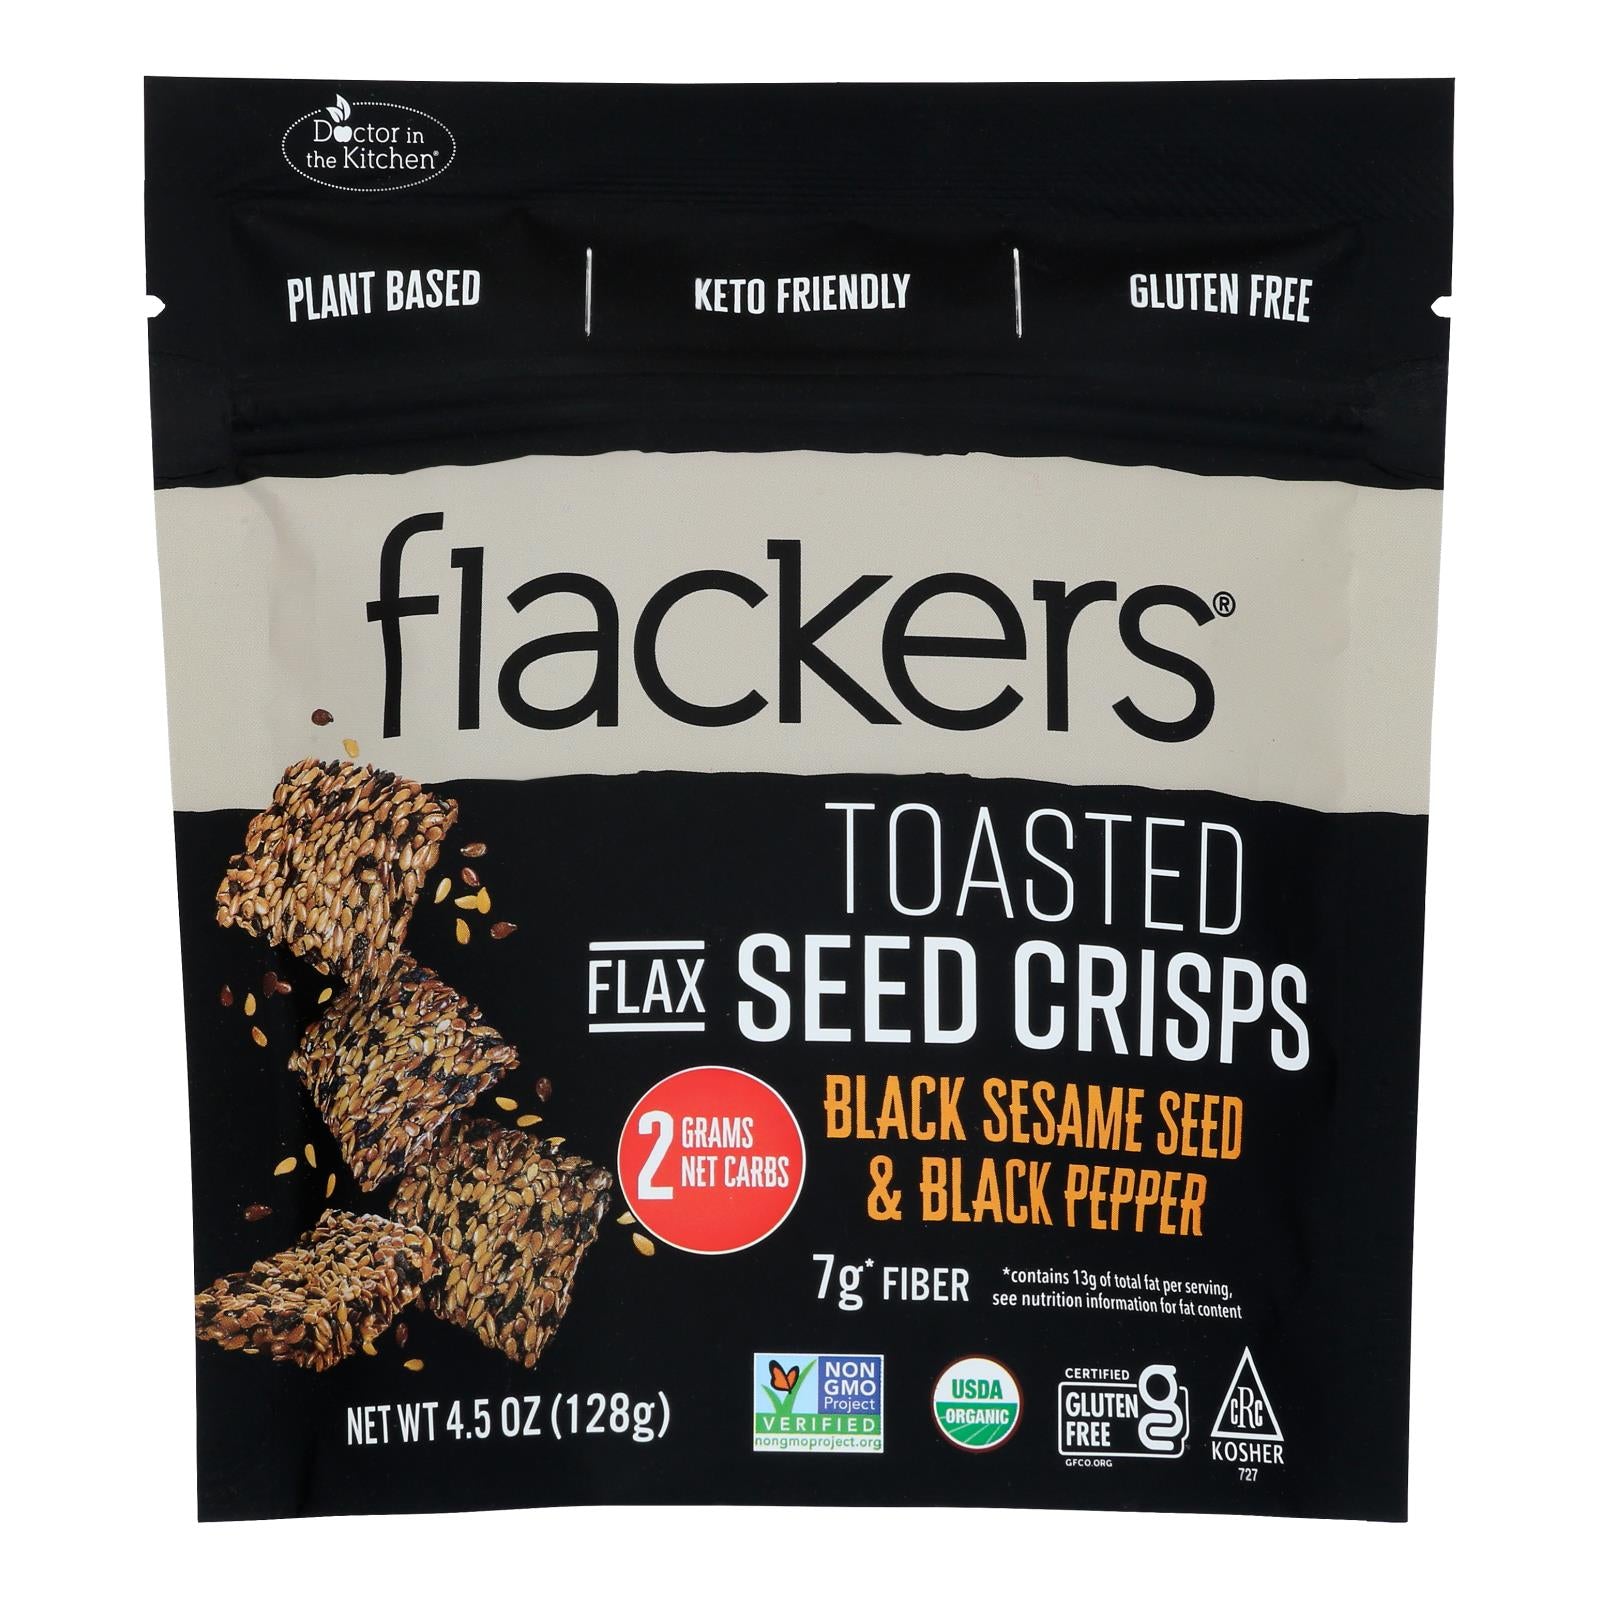 Dr. In The Kitchen - Flackers Black Sesame Pepp - Case Of 6 - 4.5 Oz